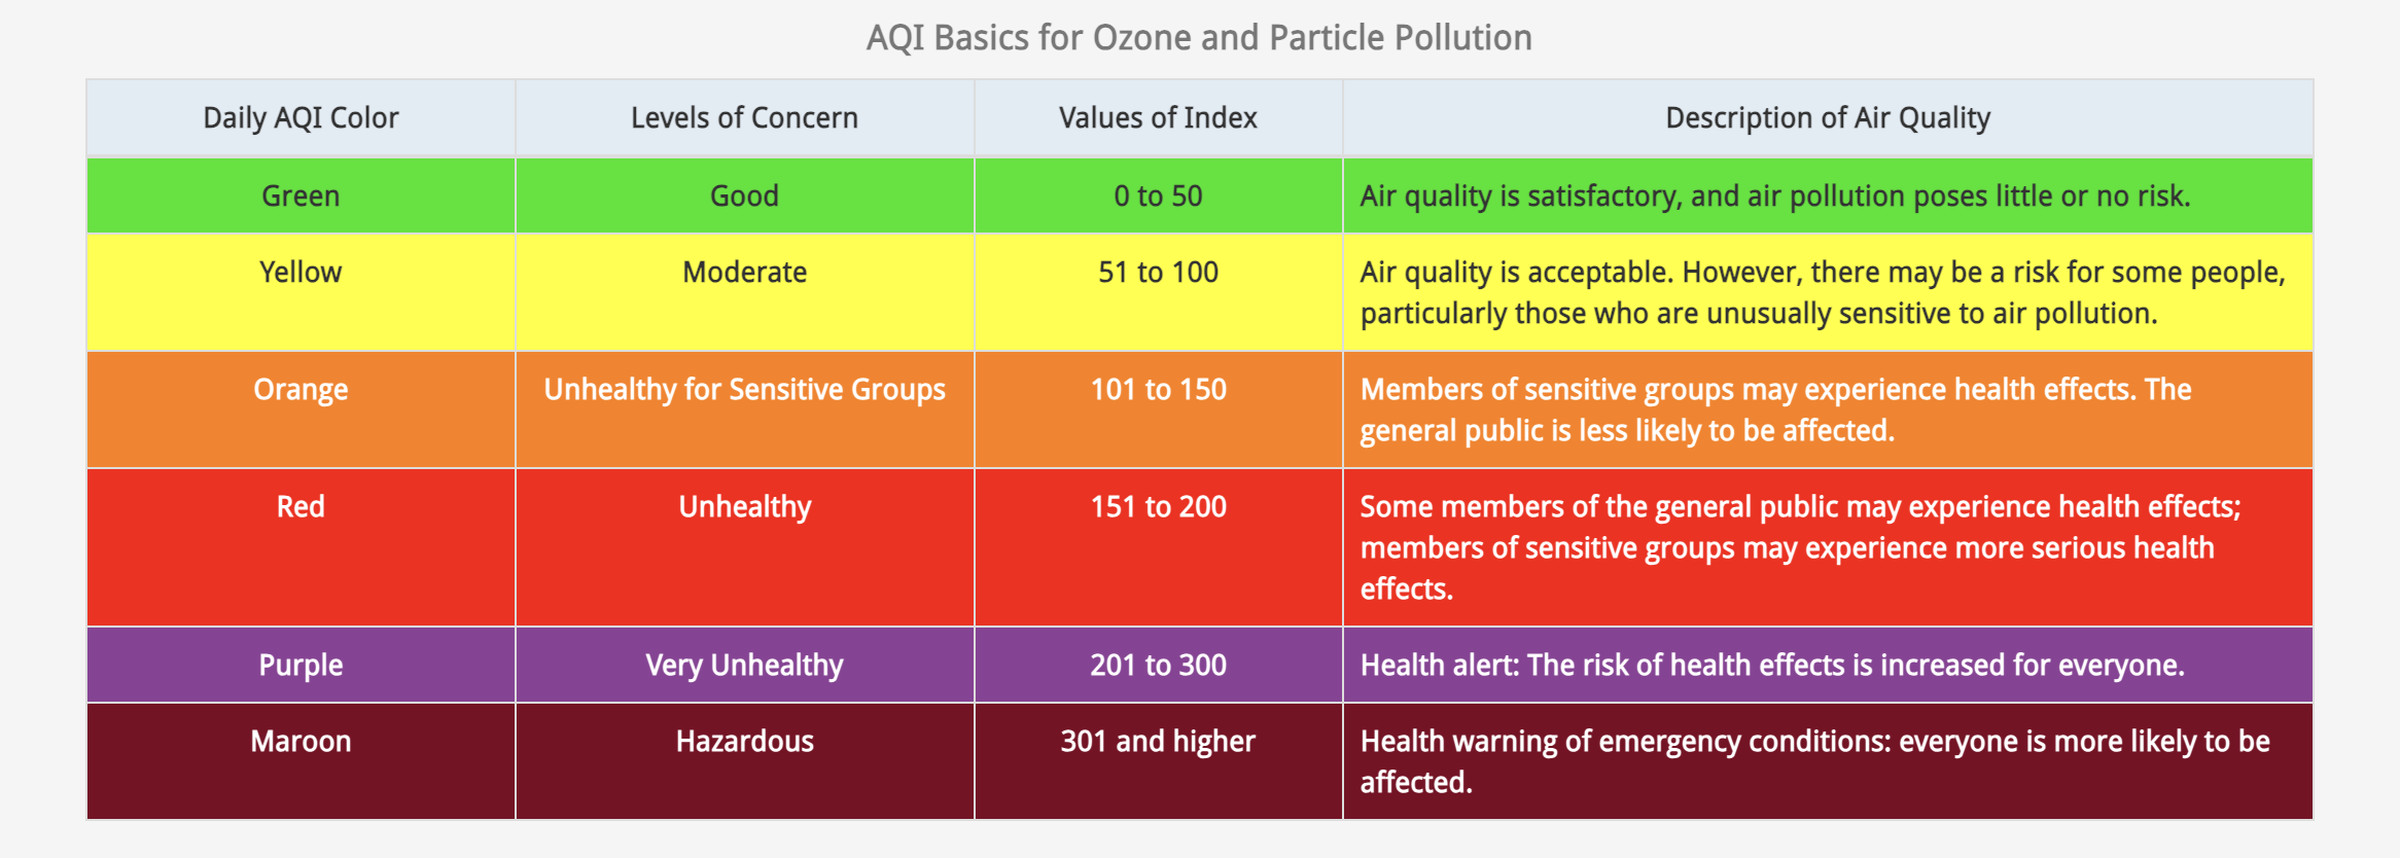 chart headed “AQI Basics for Ozone and Particle Pollution” and including six color coded rows indicating the AQI ratings:  green for good, yellow for moderate, organize for unhealthy for sensitive groups, red for unhealthy, purple for very unhealthy, and maroon for hazardous.